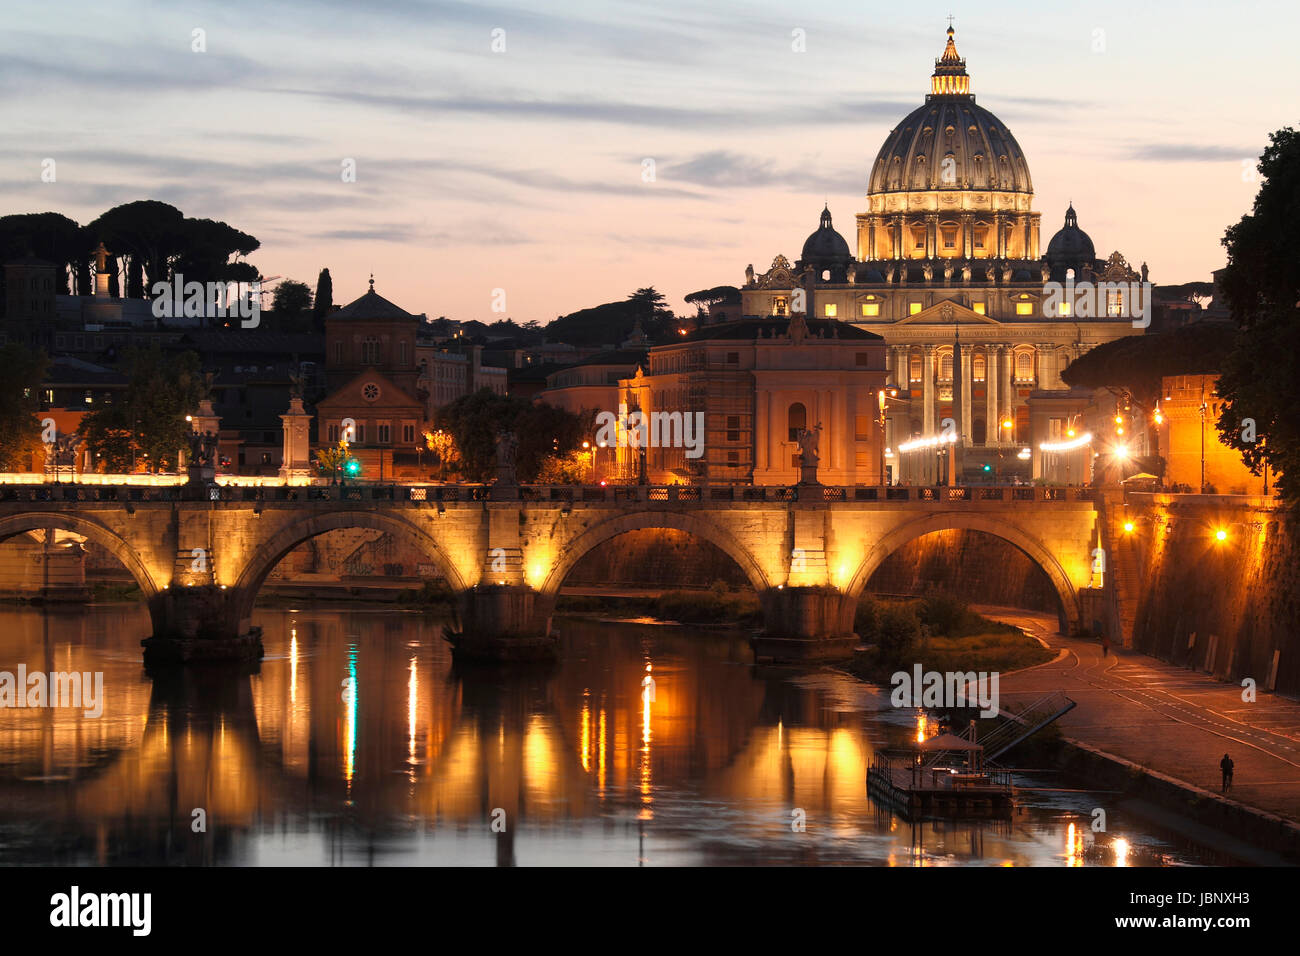 St. Peter's Basilica, Vatican City - the administrative center of the Roman Catholic Church and a country located within the city of Rome. Stock Photo